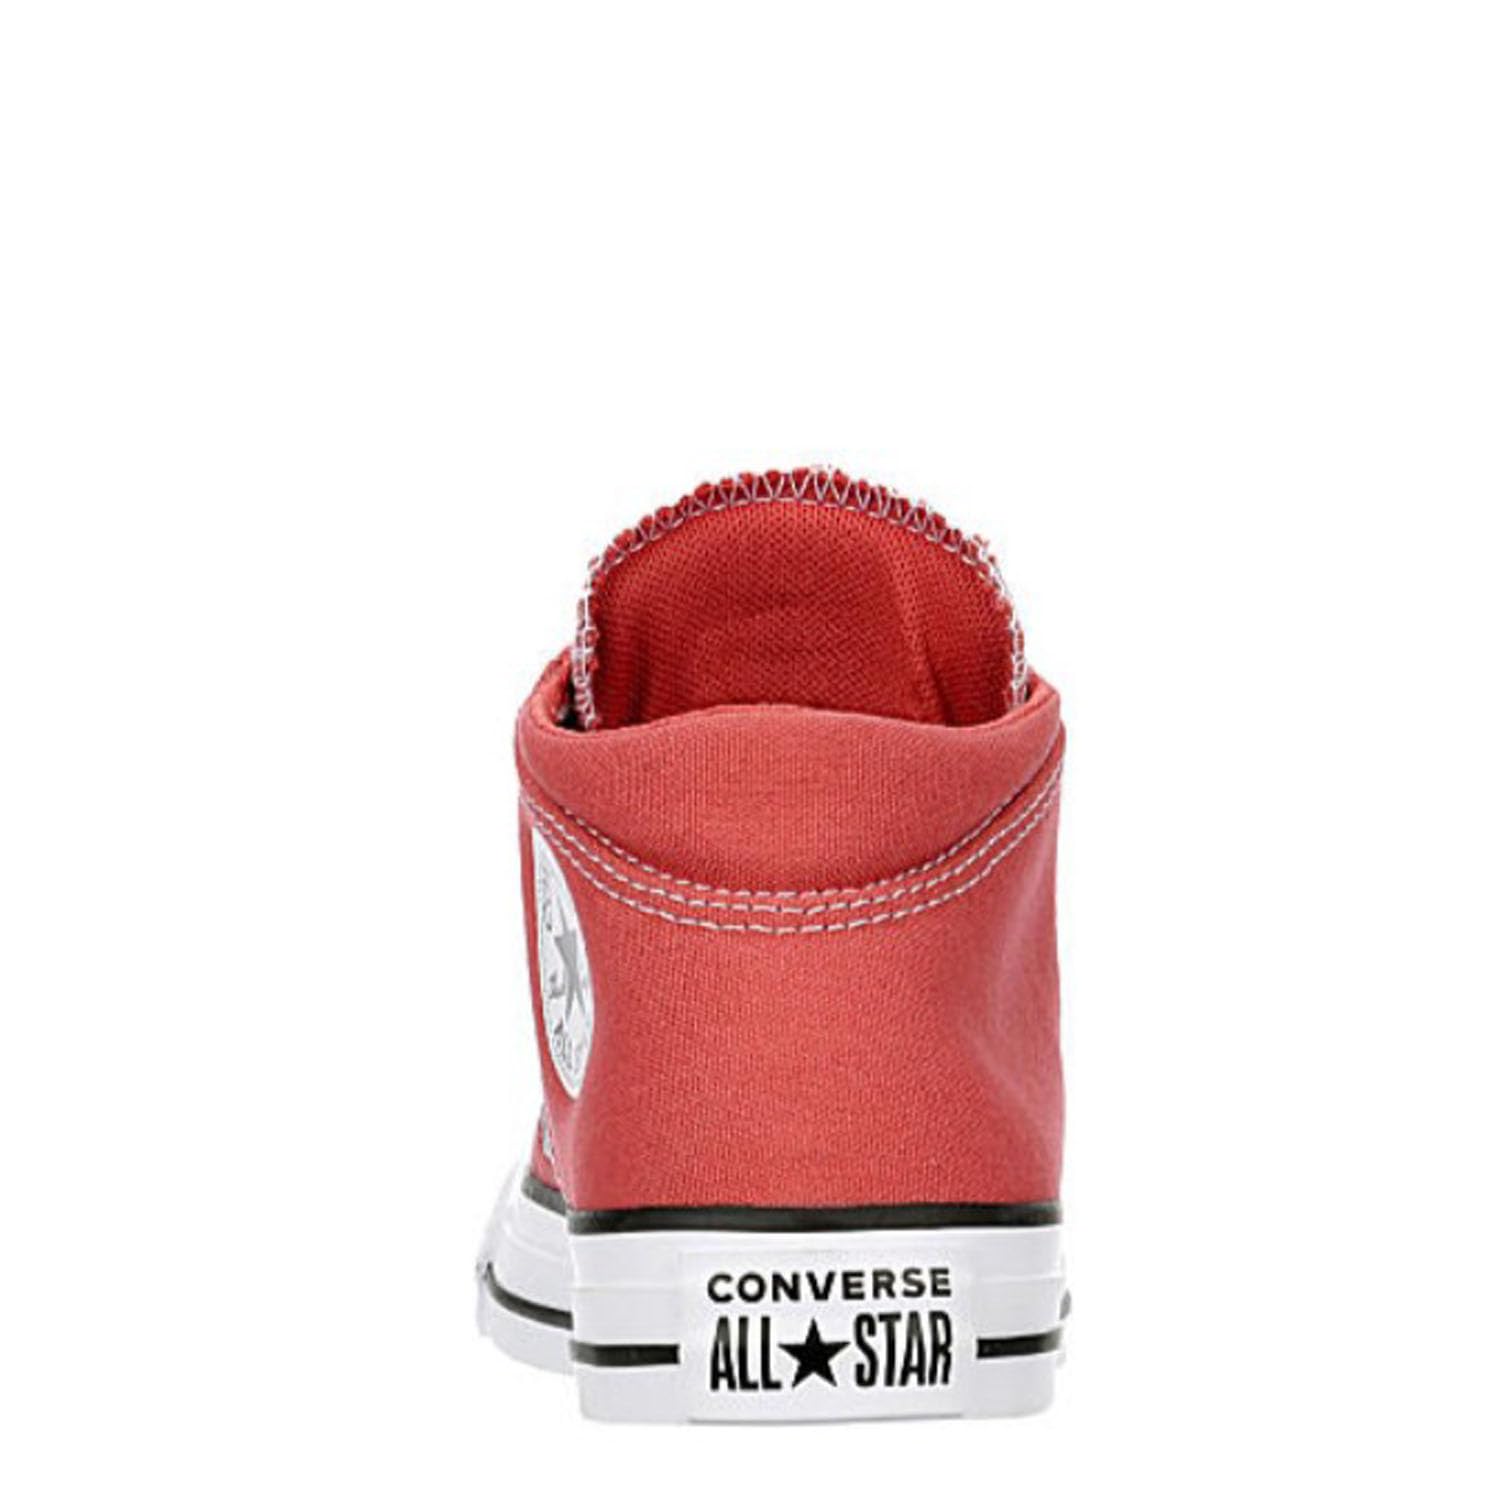 Converse Unisex Chuck Taylor All Star Madison Mid High Canvas Sneaker - Lace up Closure Style